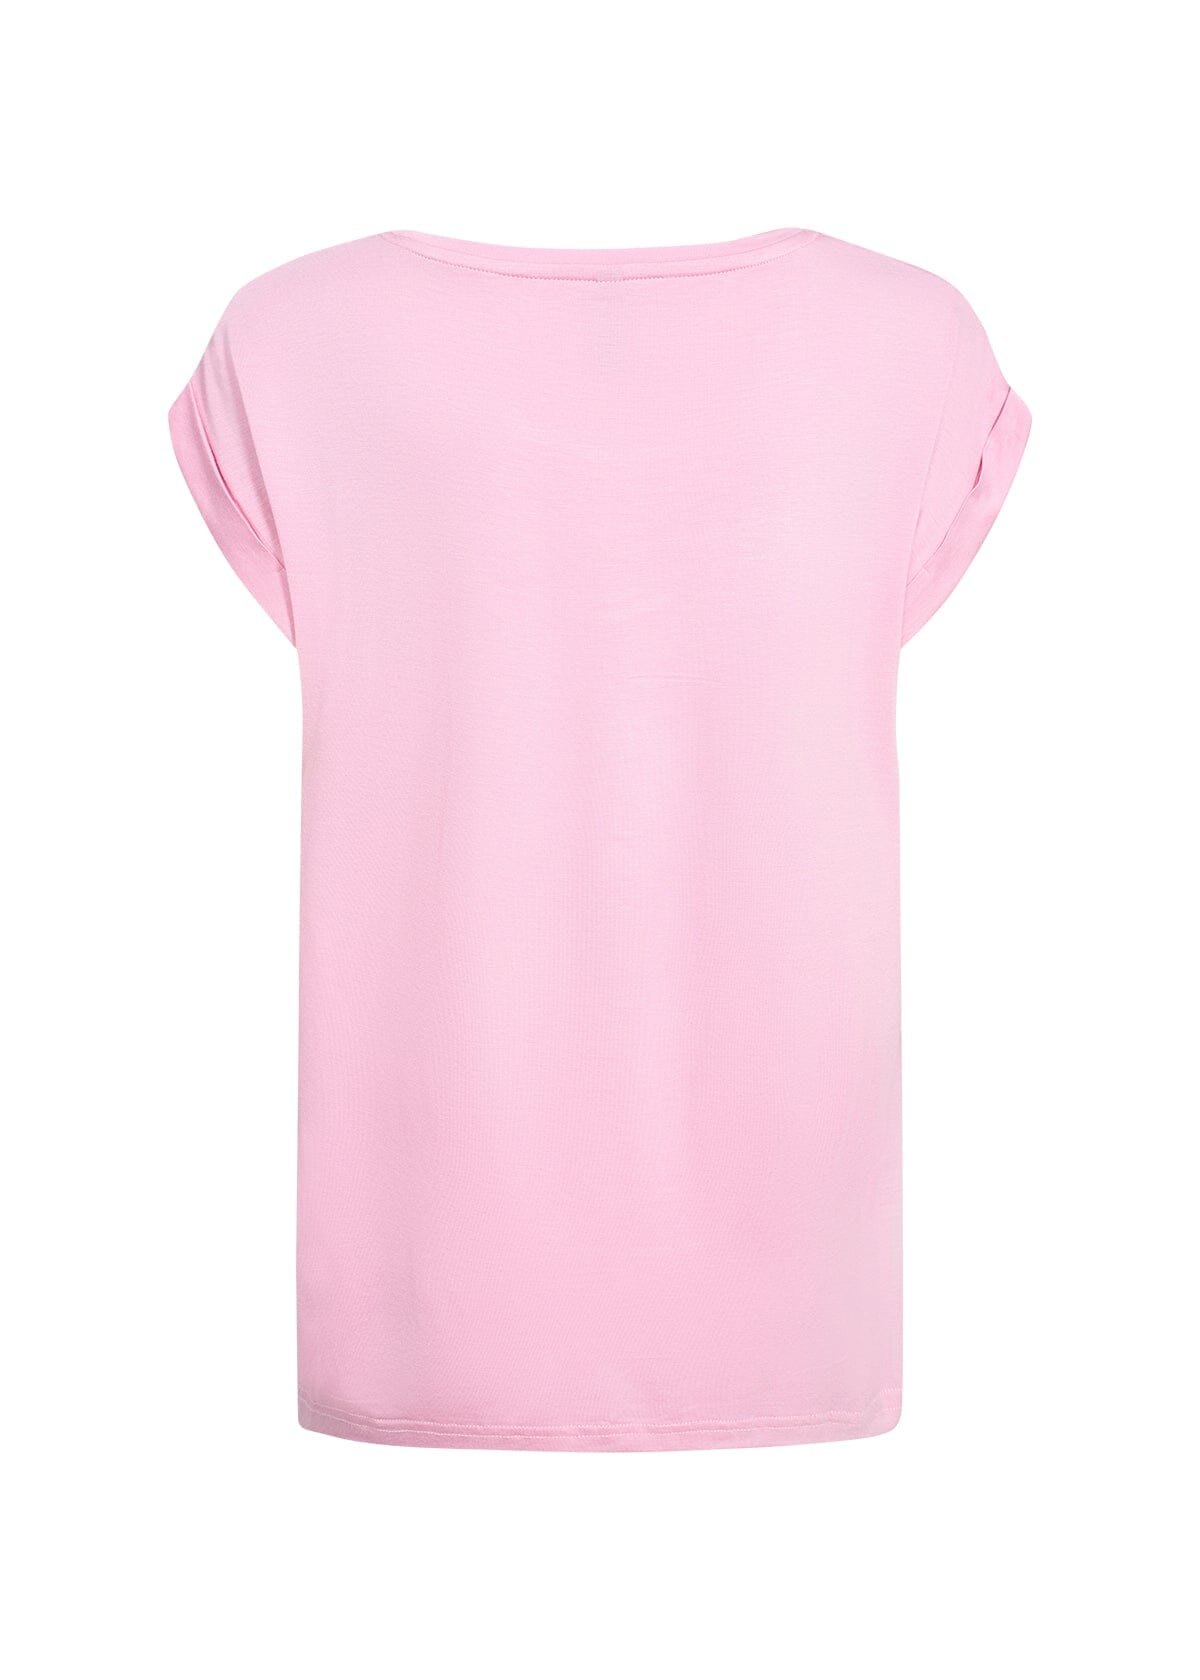 Thilde T-Shirt in Pink T-Shirt Soyaconcept 